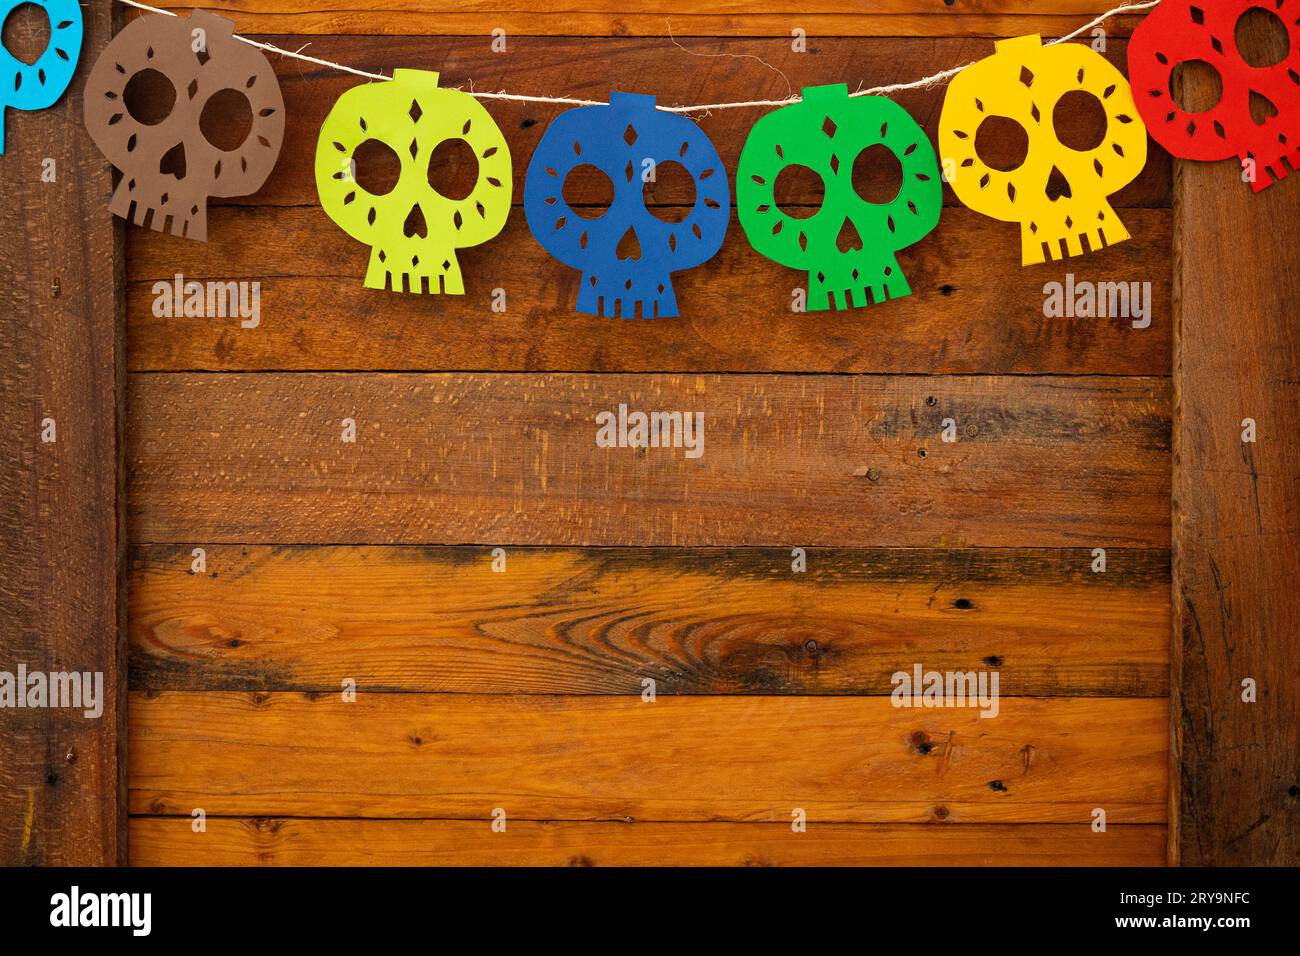 decoration of skulls of various colors made of paper on a wooden background Stock Photo